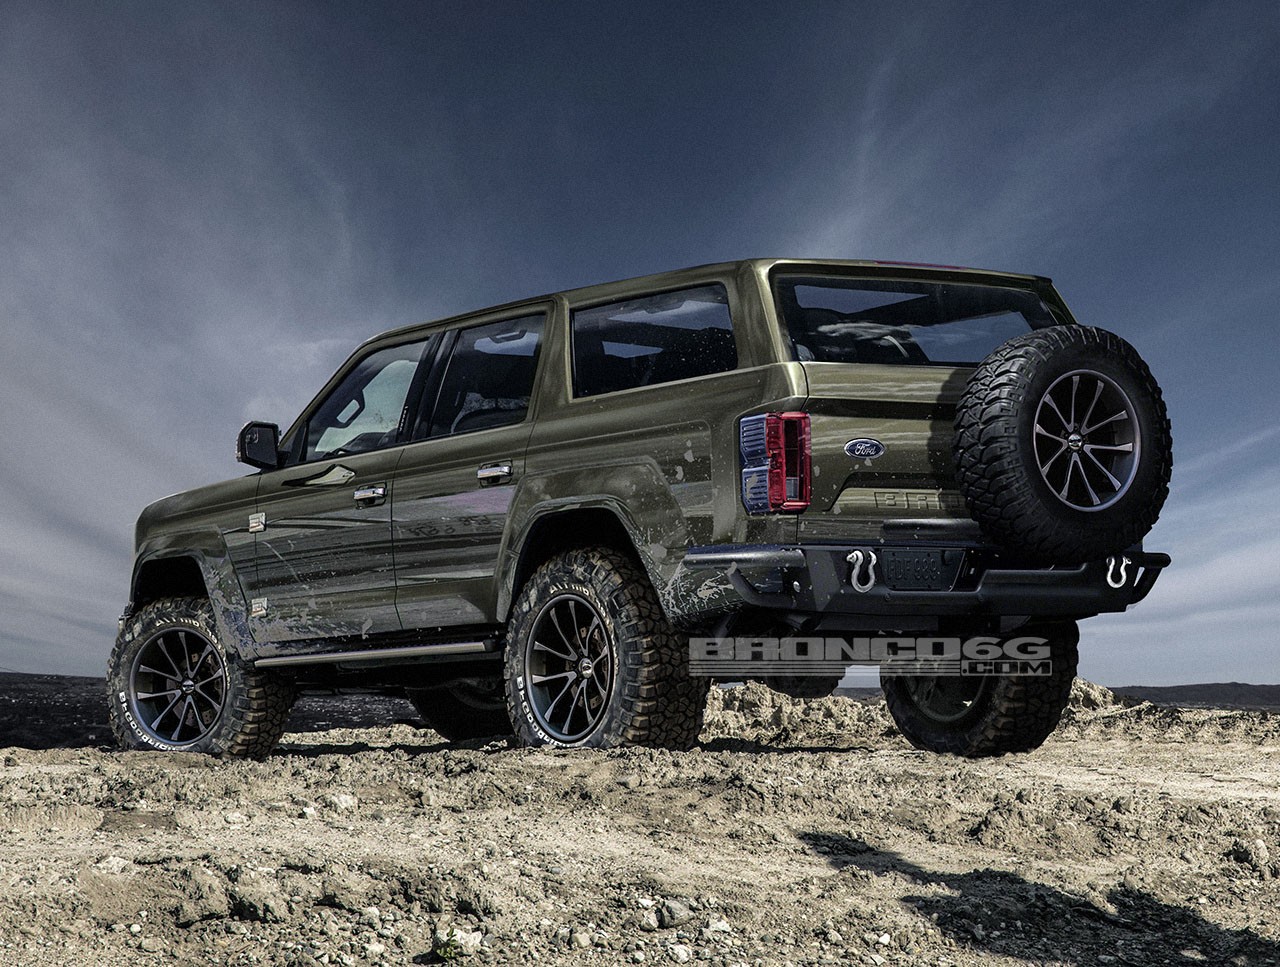 2020 Ford Bronco To Get 325 HP 2.7L EcoBoost V6 According To Report